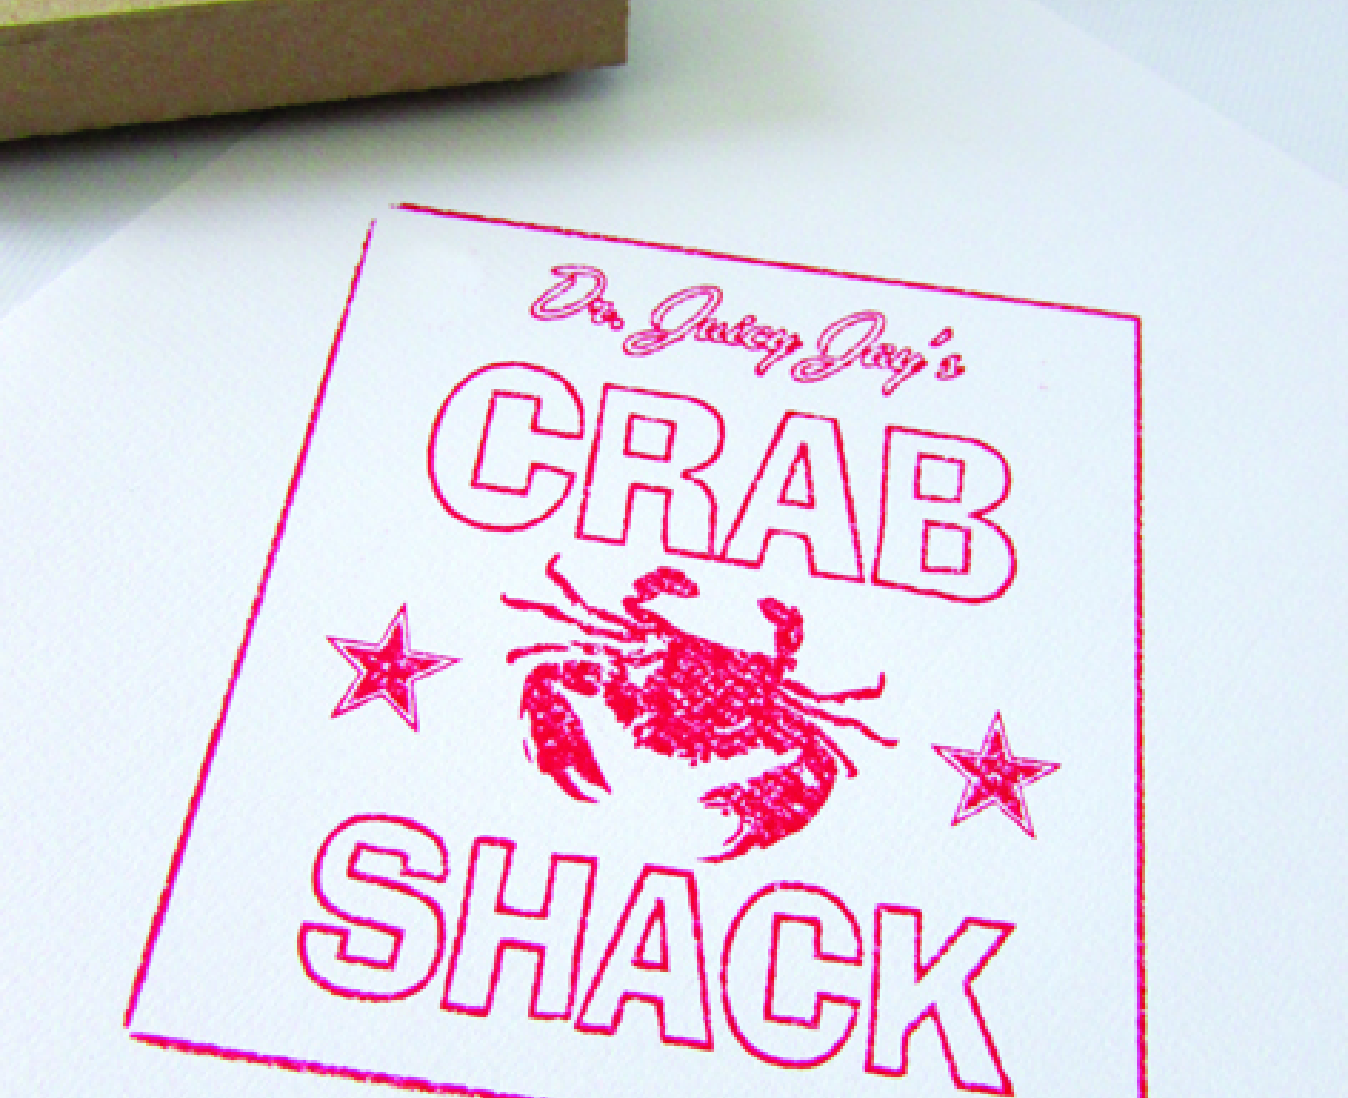 Custom Ink Stamps - RUBBER STAMP RICHMOND